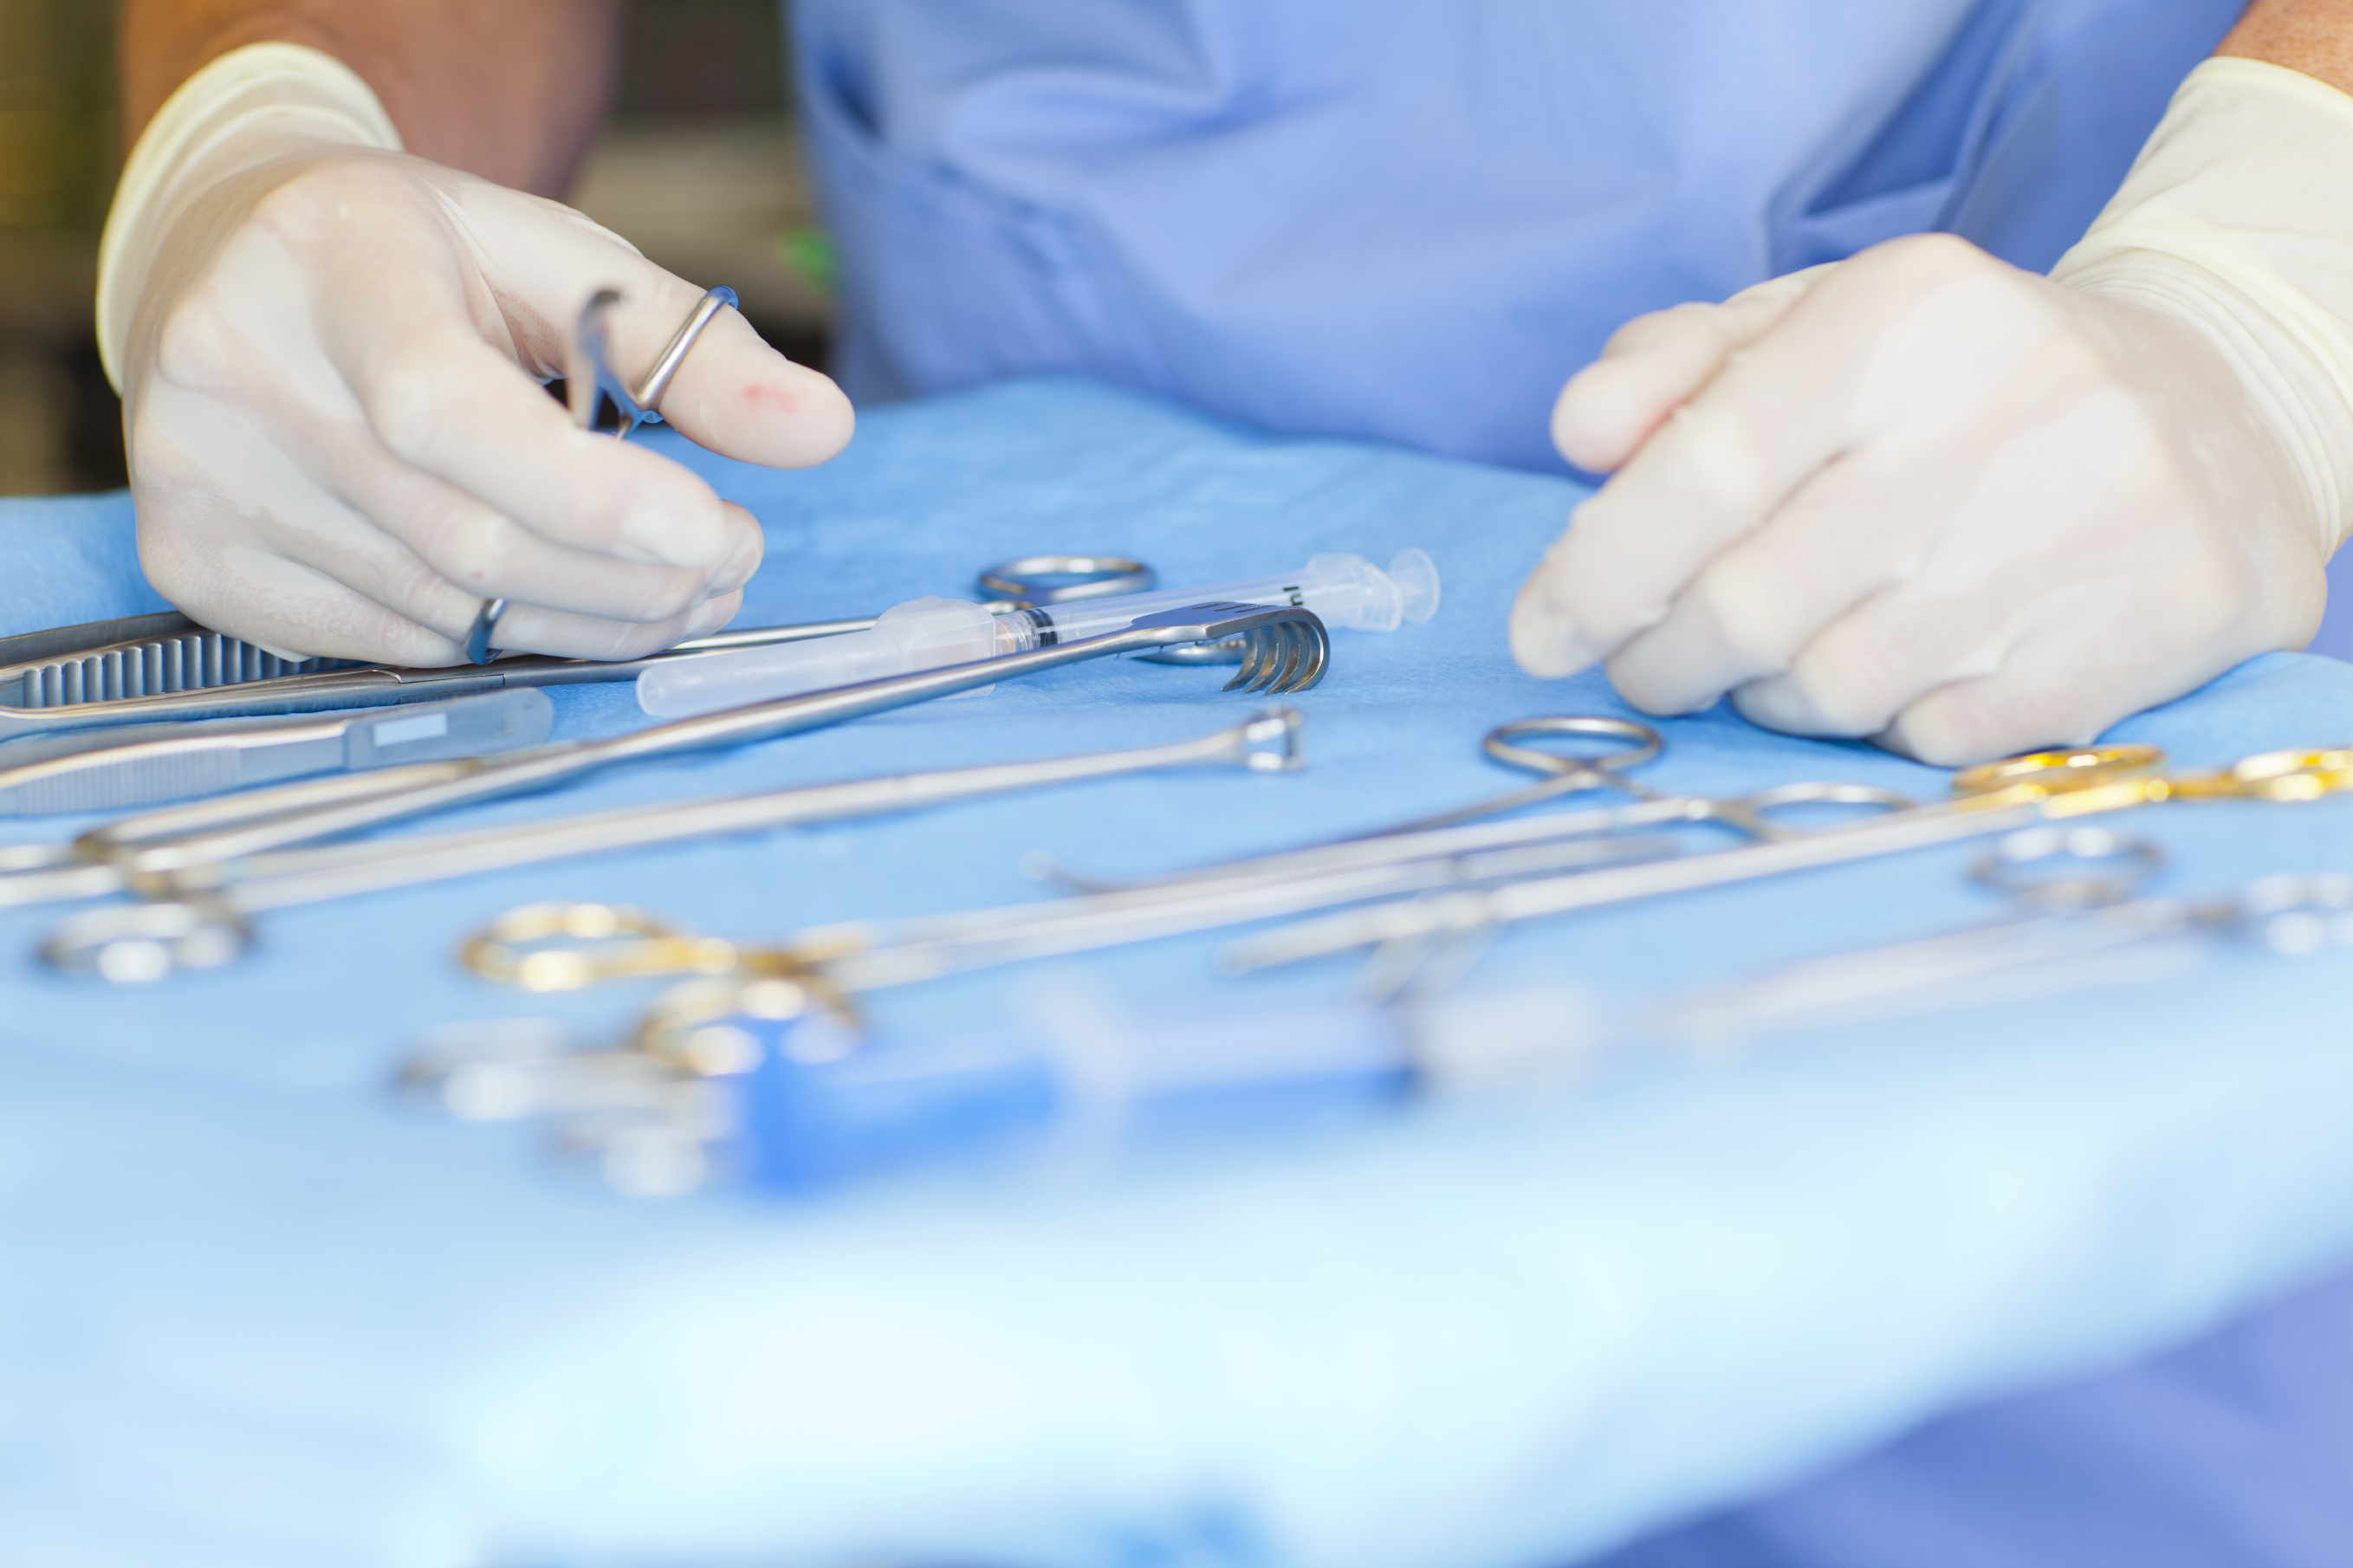 Surgical Instrument Tracking System Market 2019: Comprehensive Study Explores Huge Revenue Scope in Future | Market Analysis, Scope, Stake, Progress, Trends and Forecast to 2027